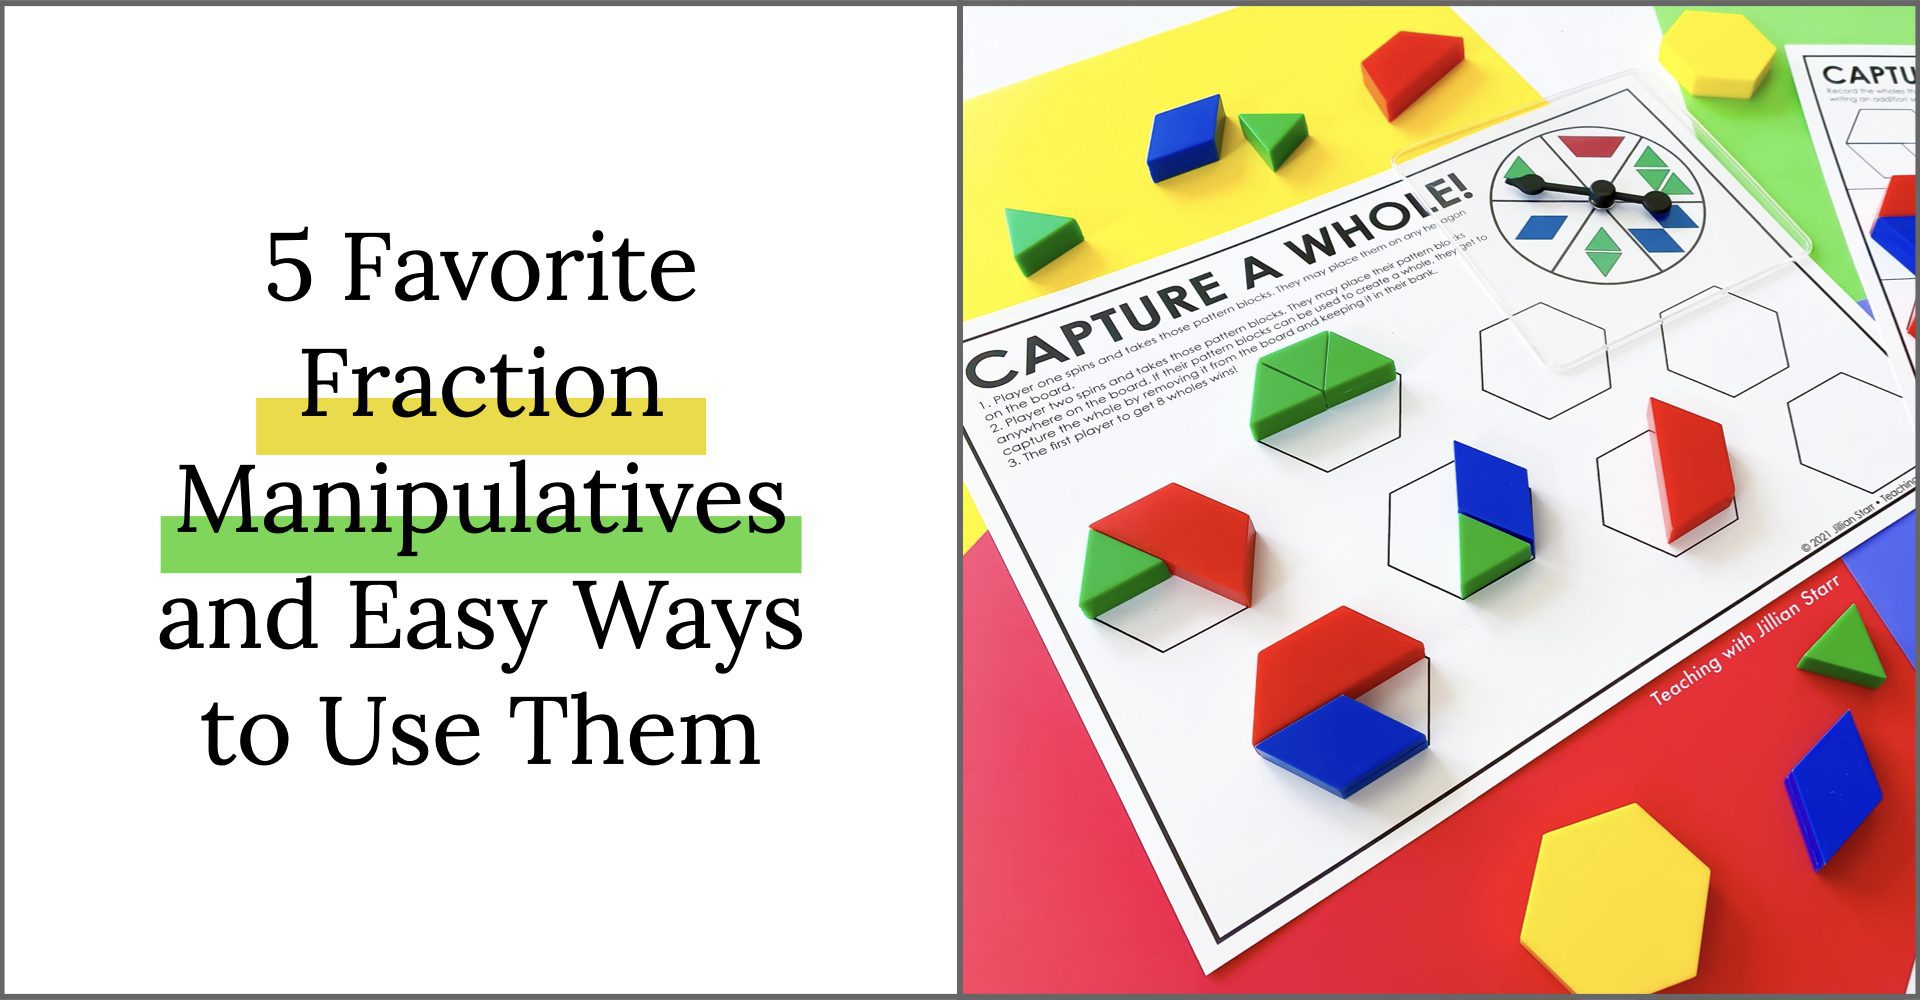 5-favorite-fraction-manipulatives-and-easy-ways-to-use-them-teaching